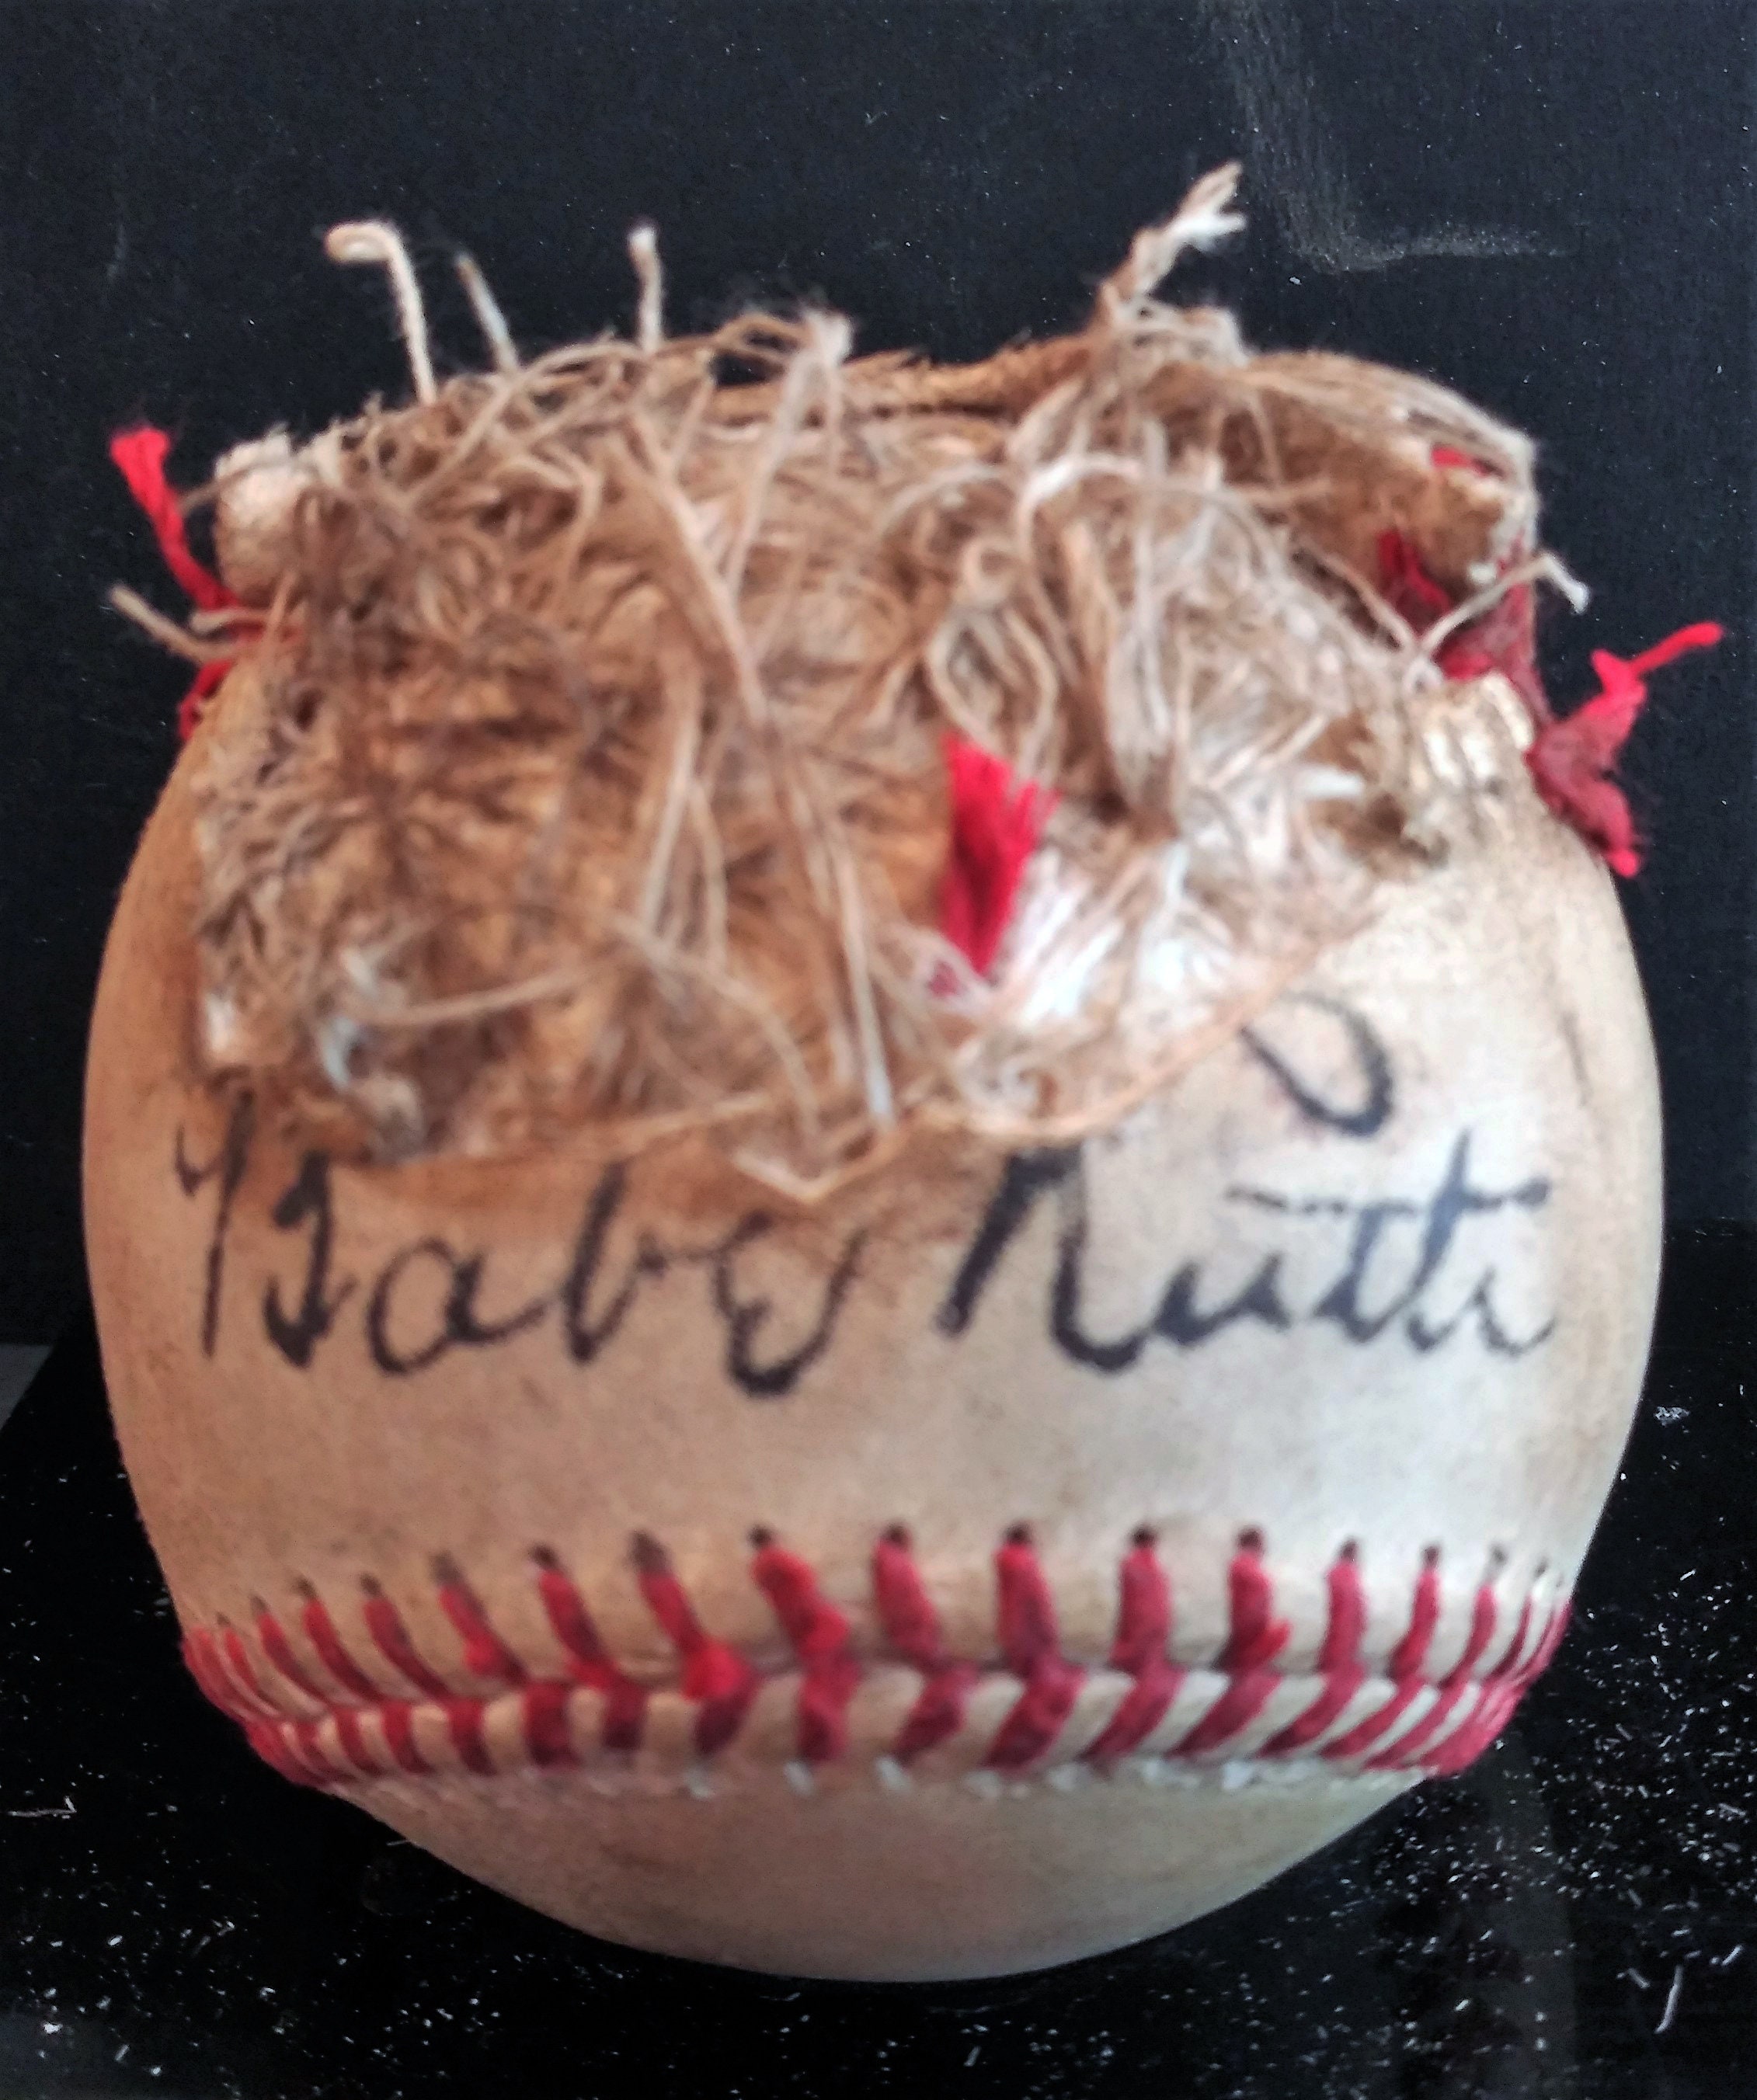 The Sandlot Babe Ruth Replica Autographed Baseball Chewed on 